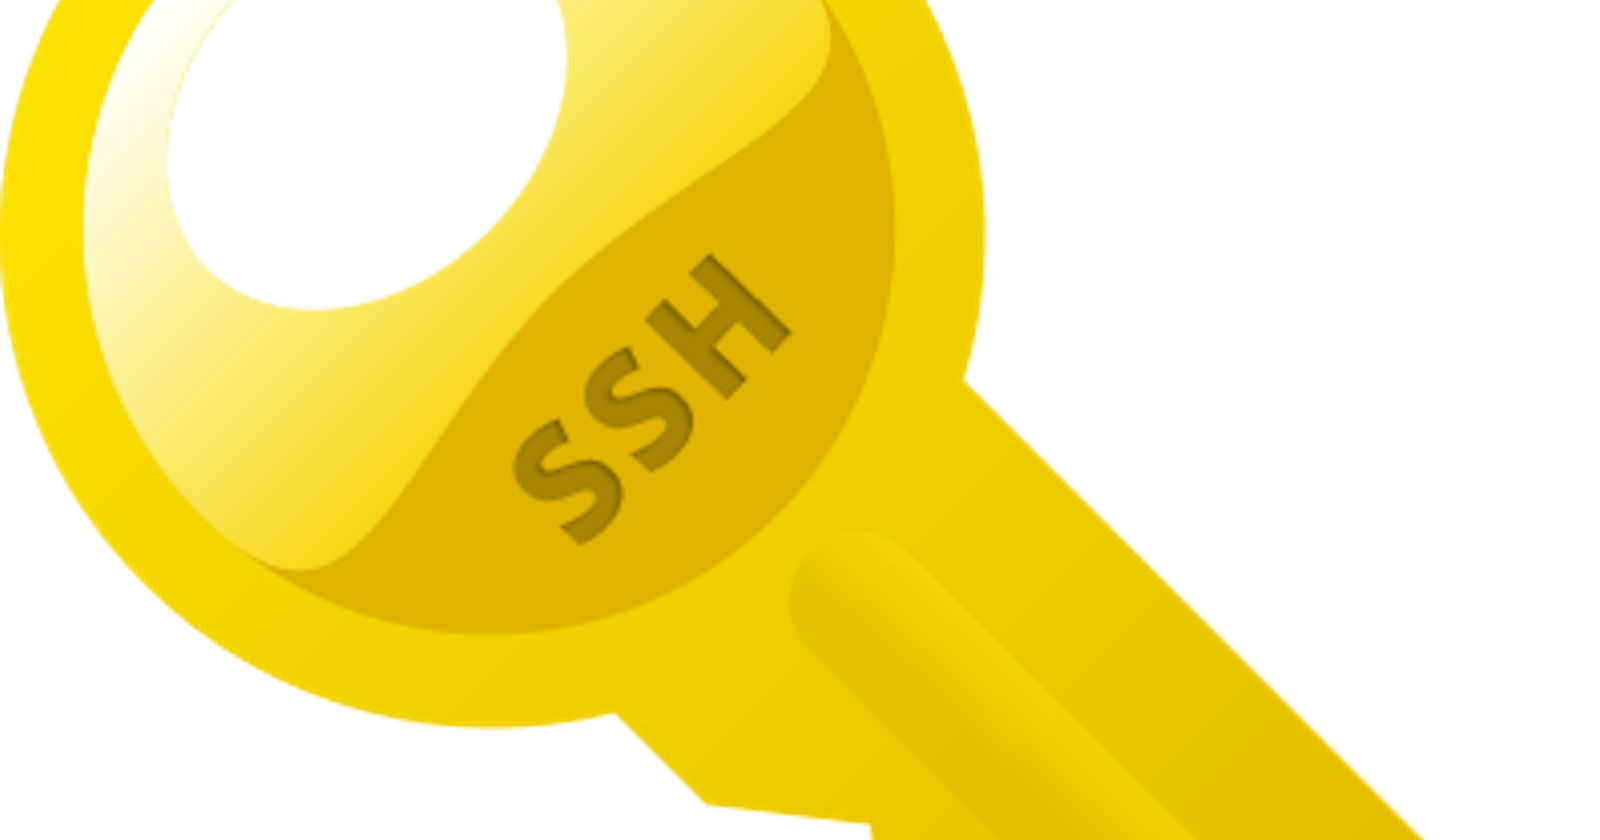 To Enable SSH into GitHub from an EC2 instance using SSH Keys